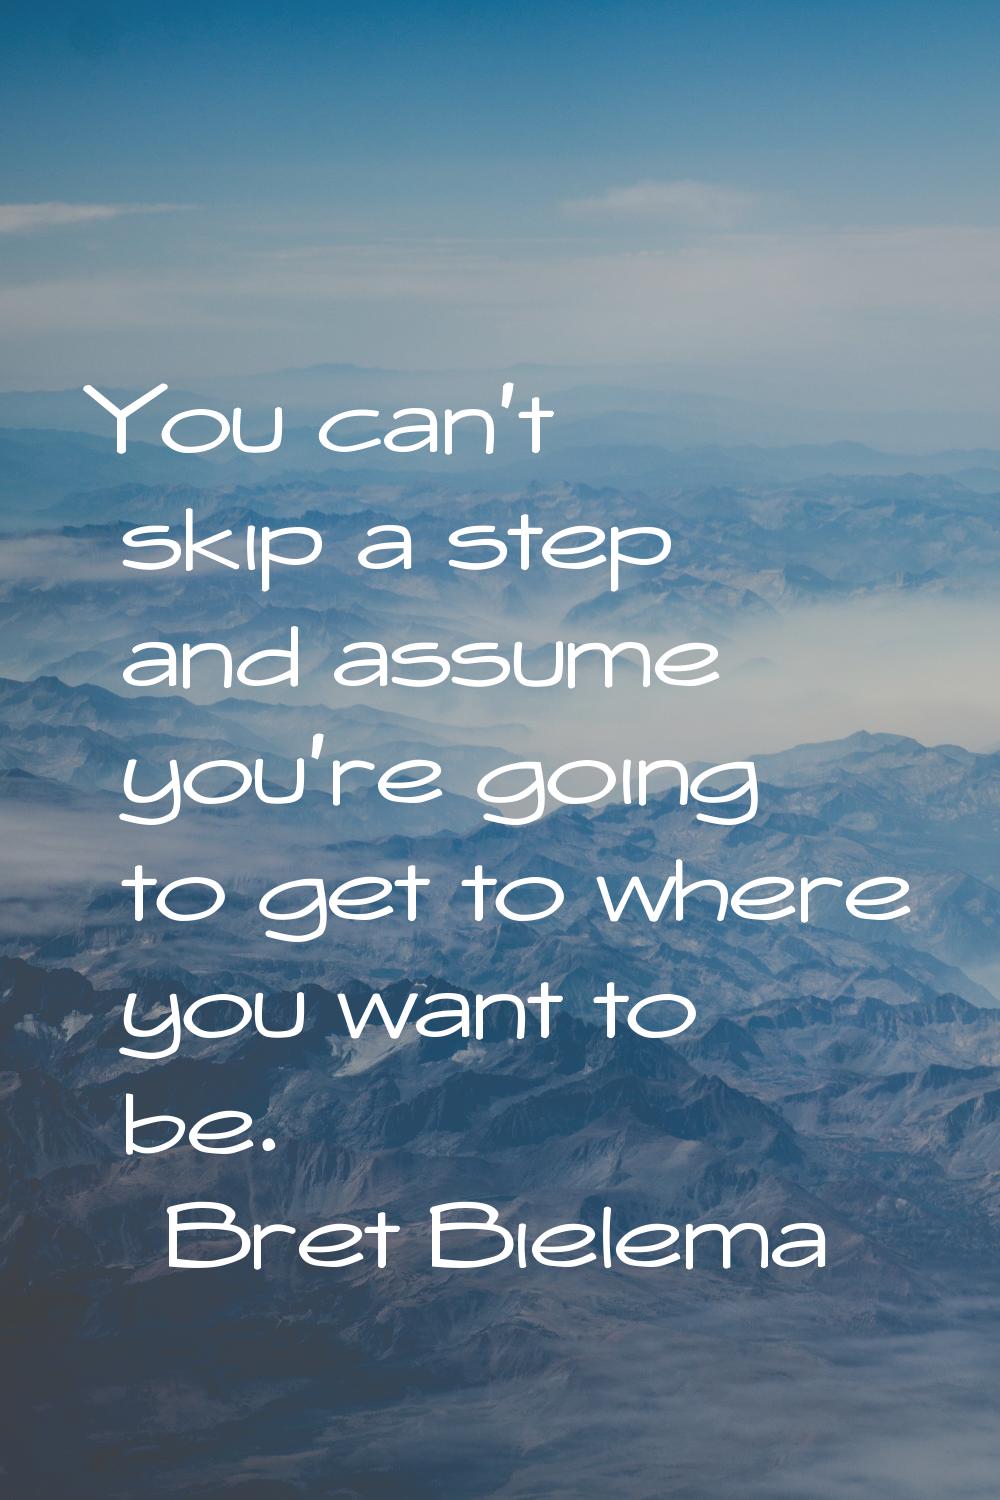 You can't skip a step and assume you're going to get to where you want to be.